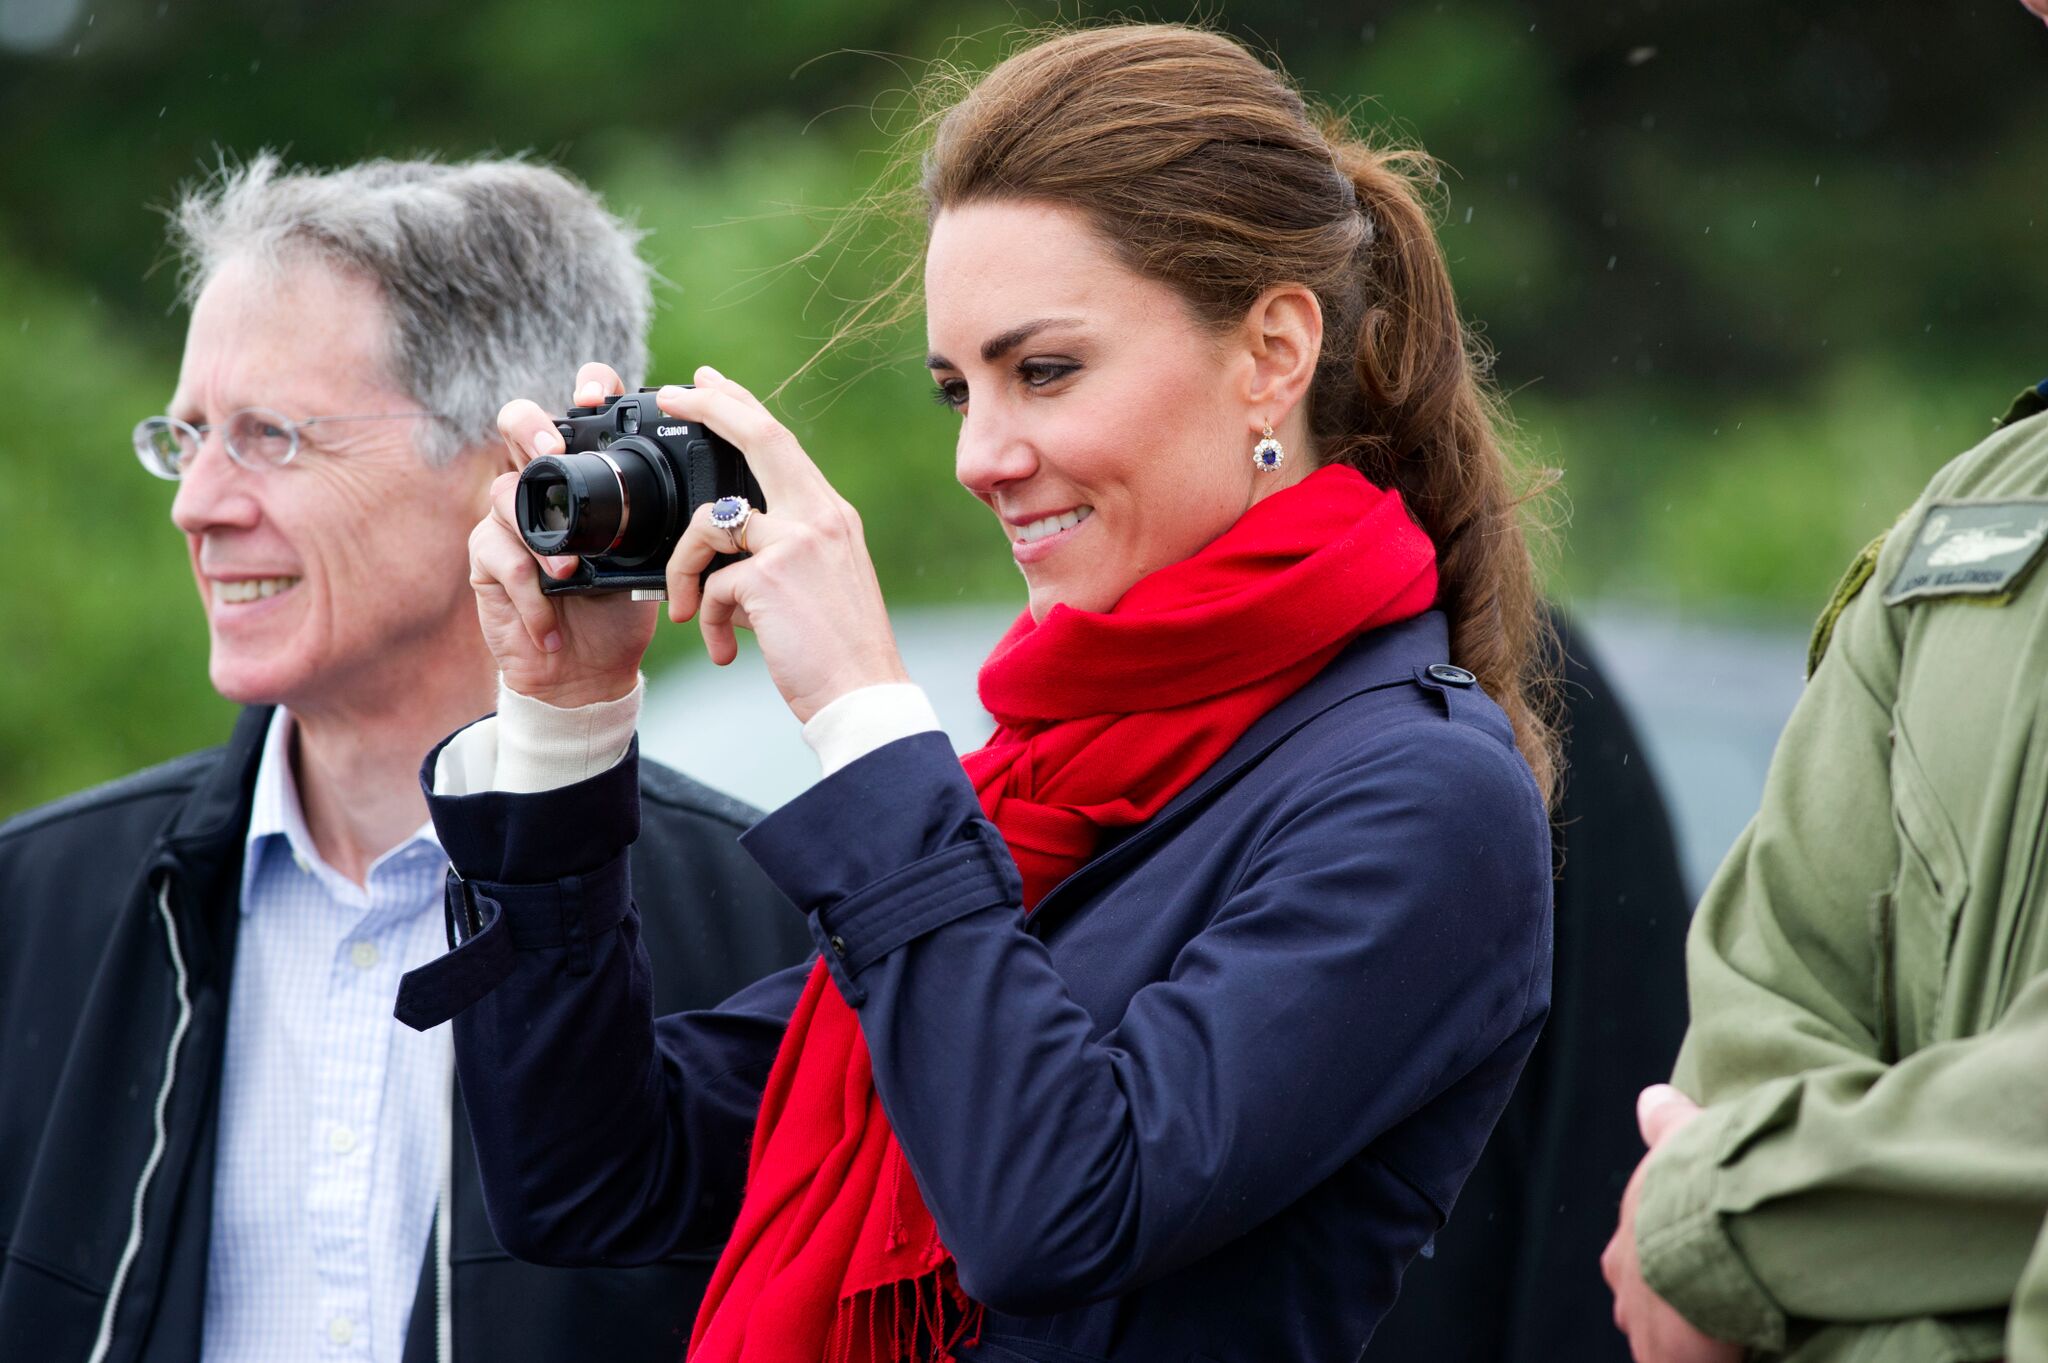  Duchess of Cambridge takes photographs as Prince William does helicopter maneuvers | Getty Images